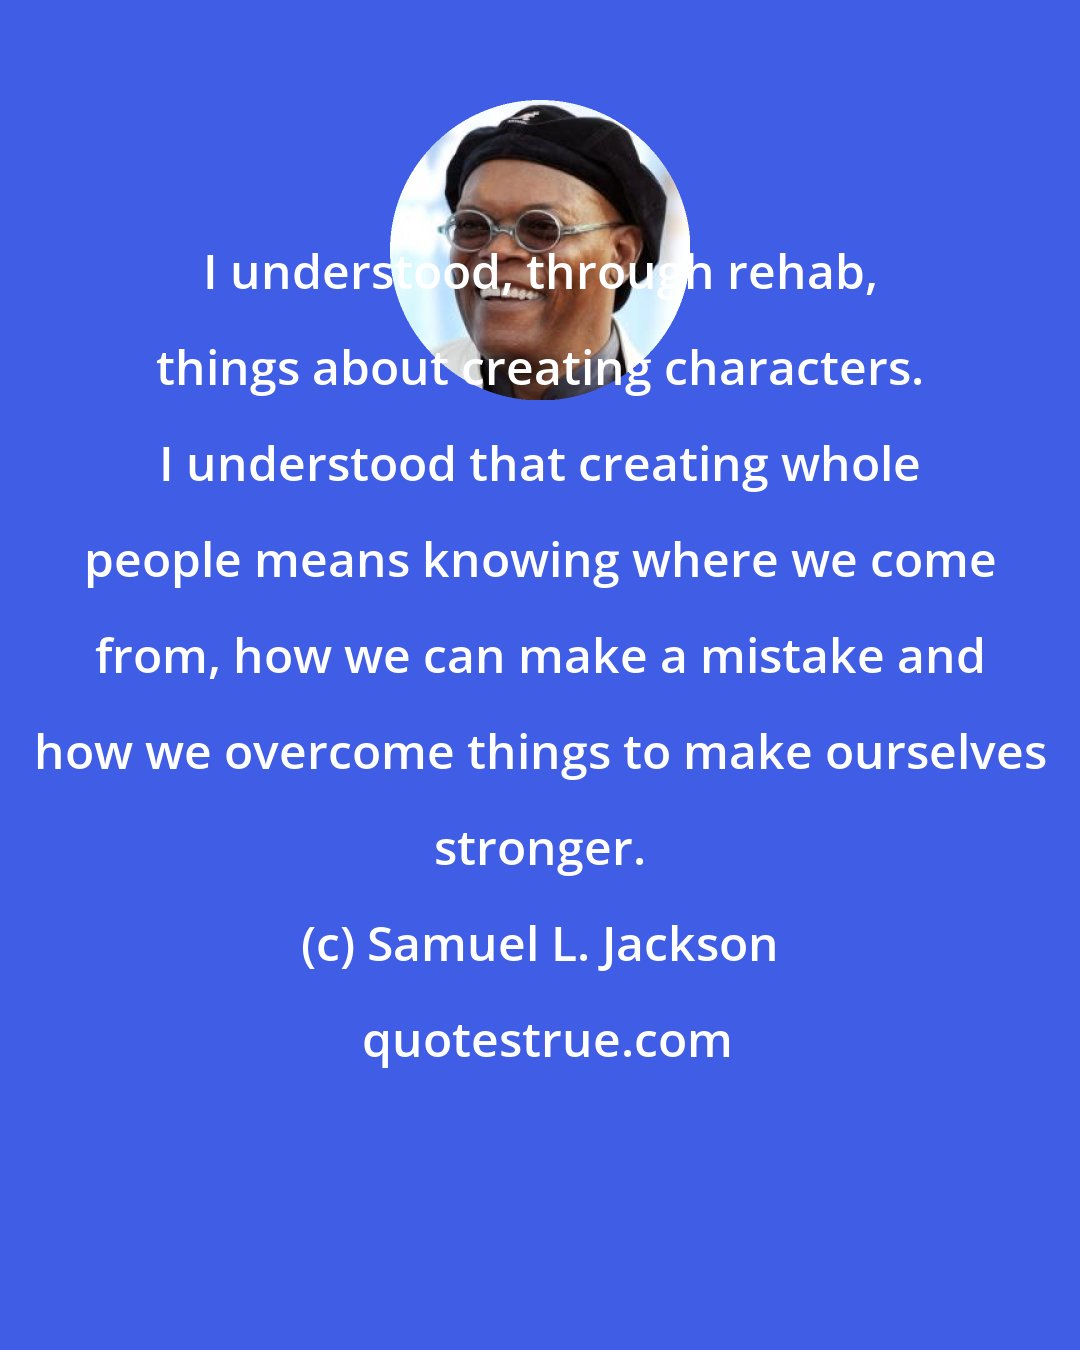 Samuel L. Jackson: I understood, through rehab, things about creating characters. I understood that creating whole people means knowing where we come from, how we can make a mistake and how we overcome things to make ourselves stronger.